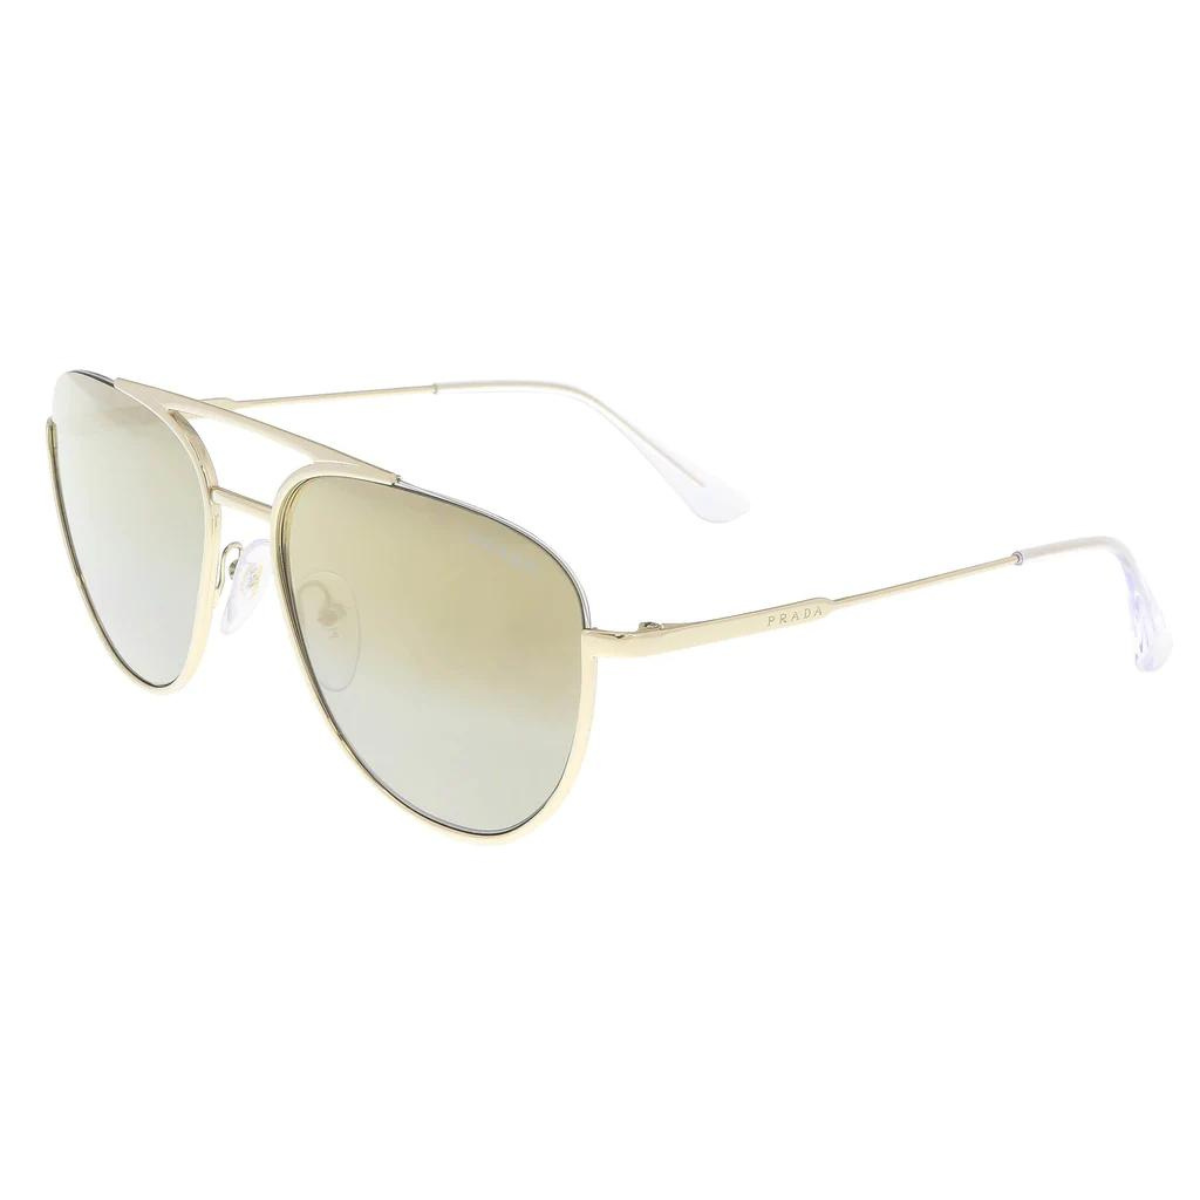 "Discover the latest Prada PR 50US ZVN6O0 Aviator Sunglasses for men at Optorium. Enhance your look and elevate your eyewear game with stylish men's shades from Prada."